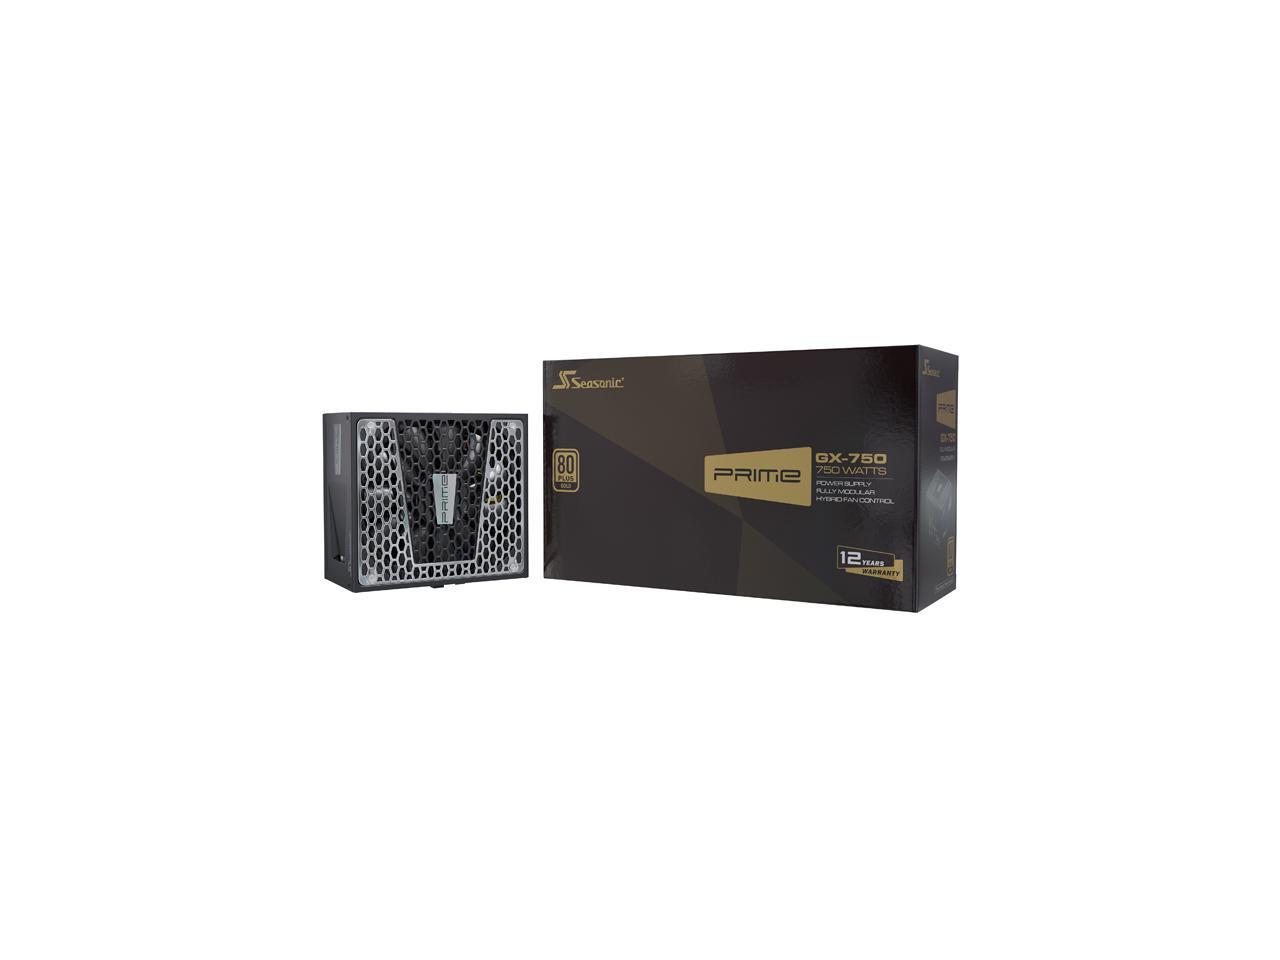 Seasonic PRIME GX-750, 750W 80+ Gold, Full Modular, Fan Control in Fanless, Silent, and Cooling Mode, 12 Year Warranty, Perfect Power Supply for Gaming and High-Performance Systems, SSR-750GD2.